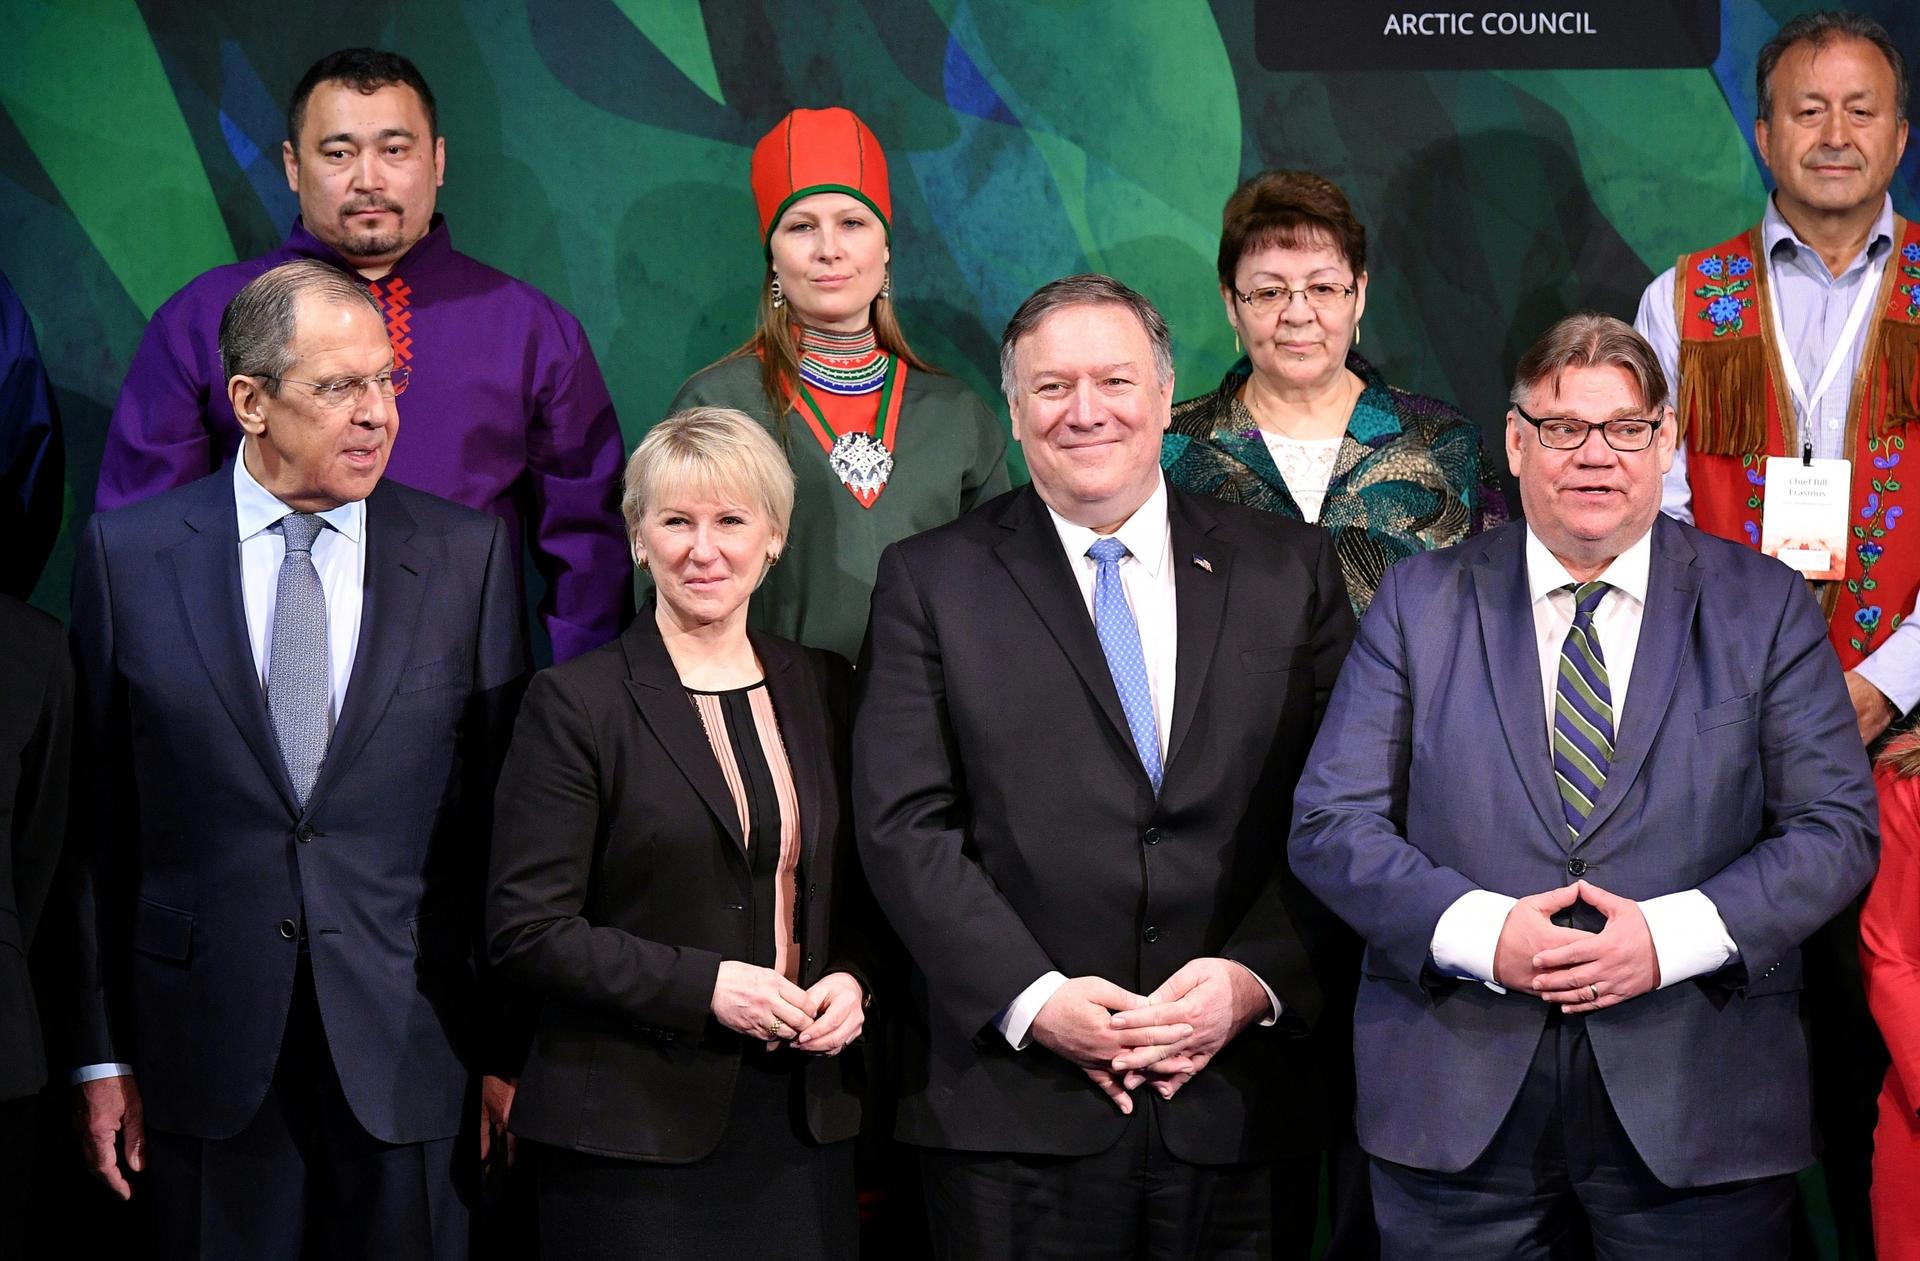 Front row from left, Foreign Ministers of Russia, Sergey Lavrov, Sweden, Margot Wallstrom, U.S. Secretary of State Mike Pompeo and Finland's Foreign Minister Timo Soini during the Arctic Council summit Rovaniemi, Rovaniemi, Finland May 7, 2019.